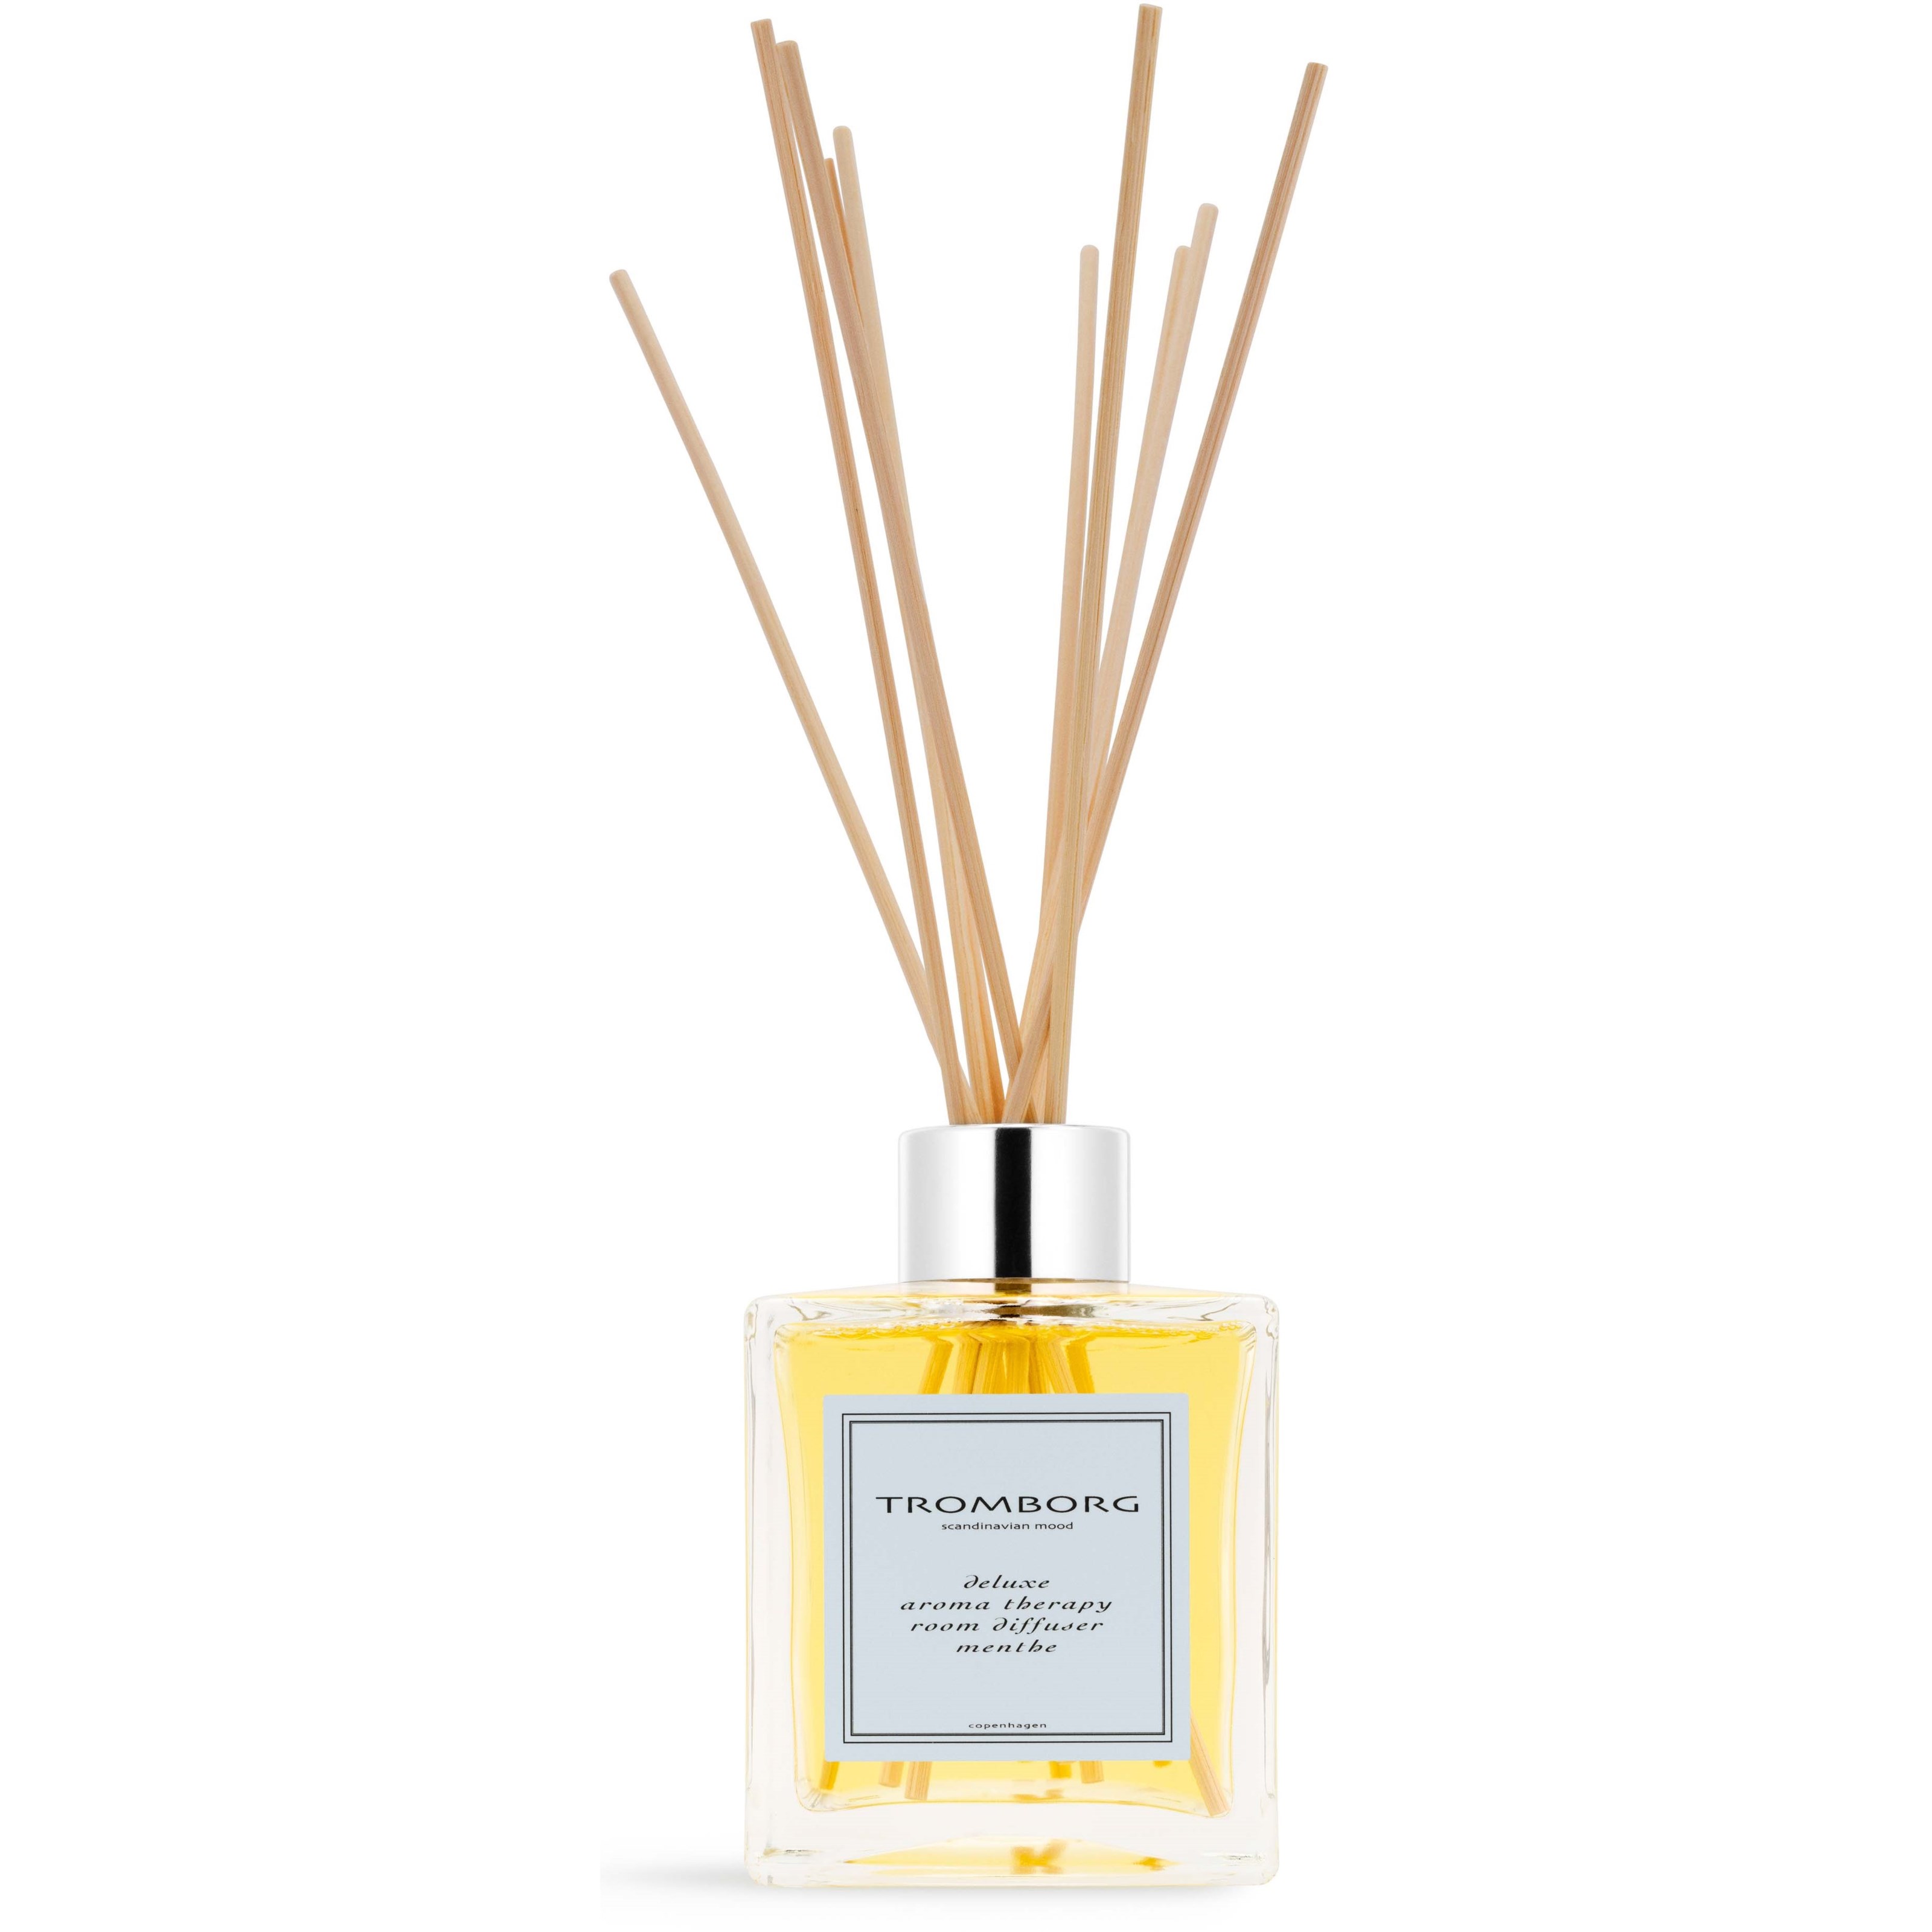 Tromborg Aroma Therapy Room Diffuser Menthe 200 ml